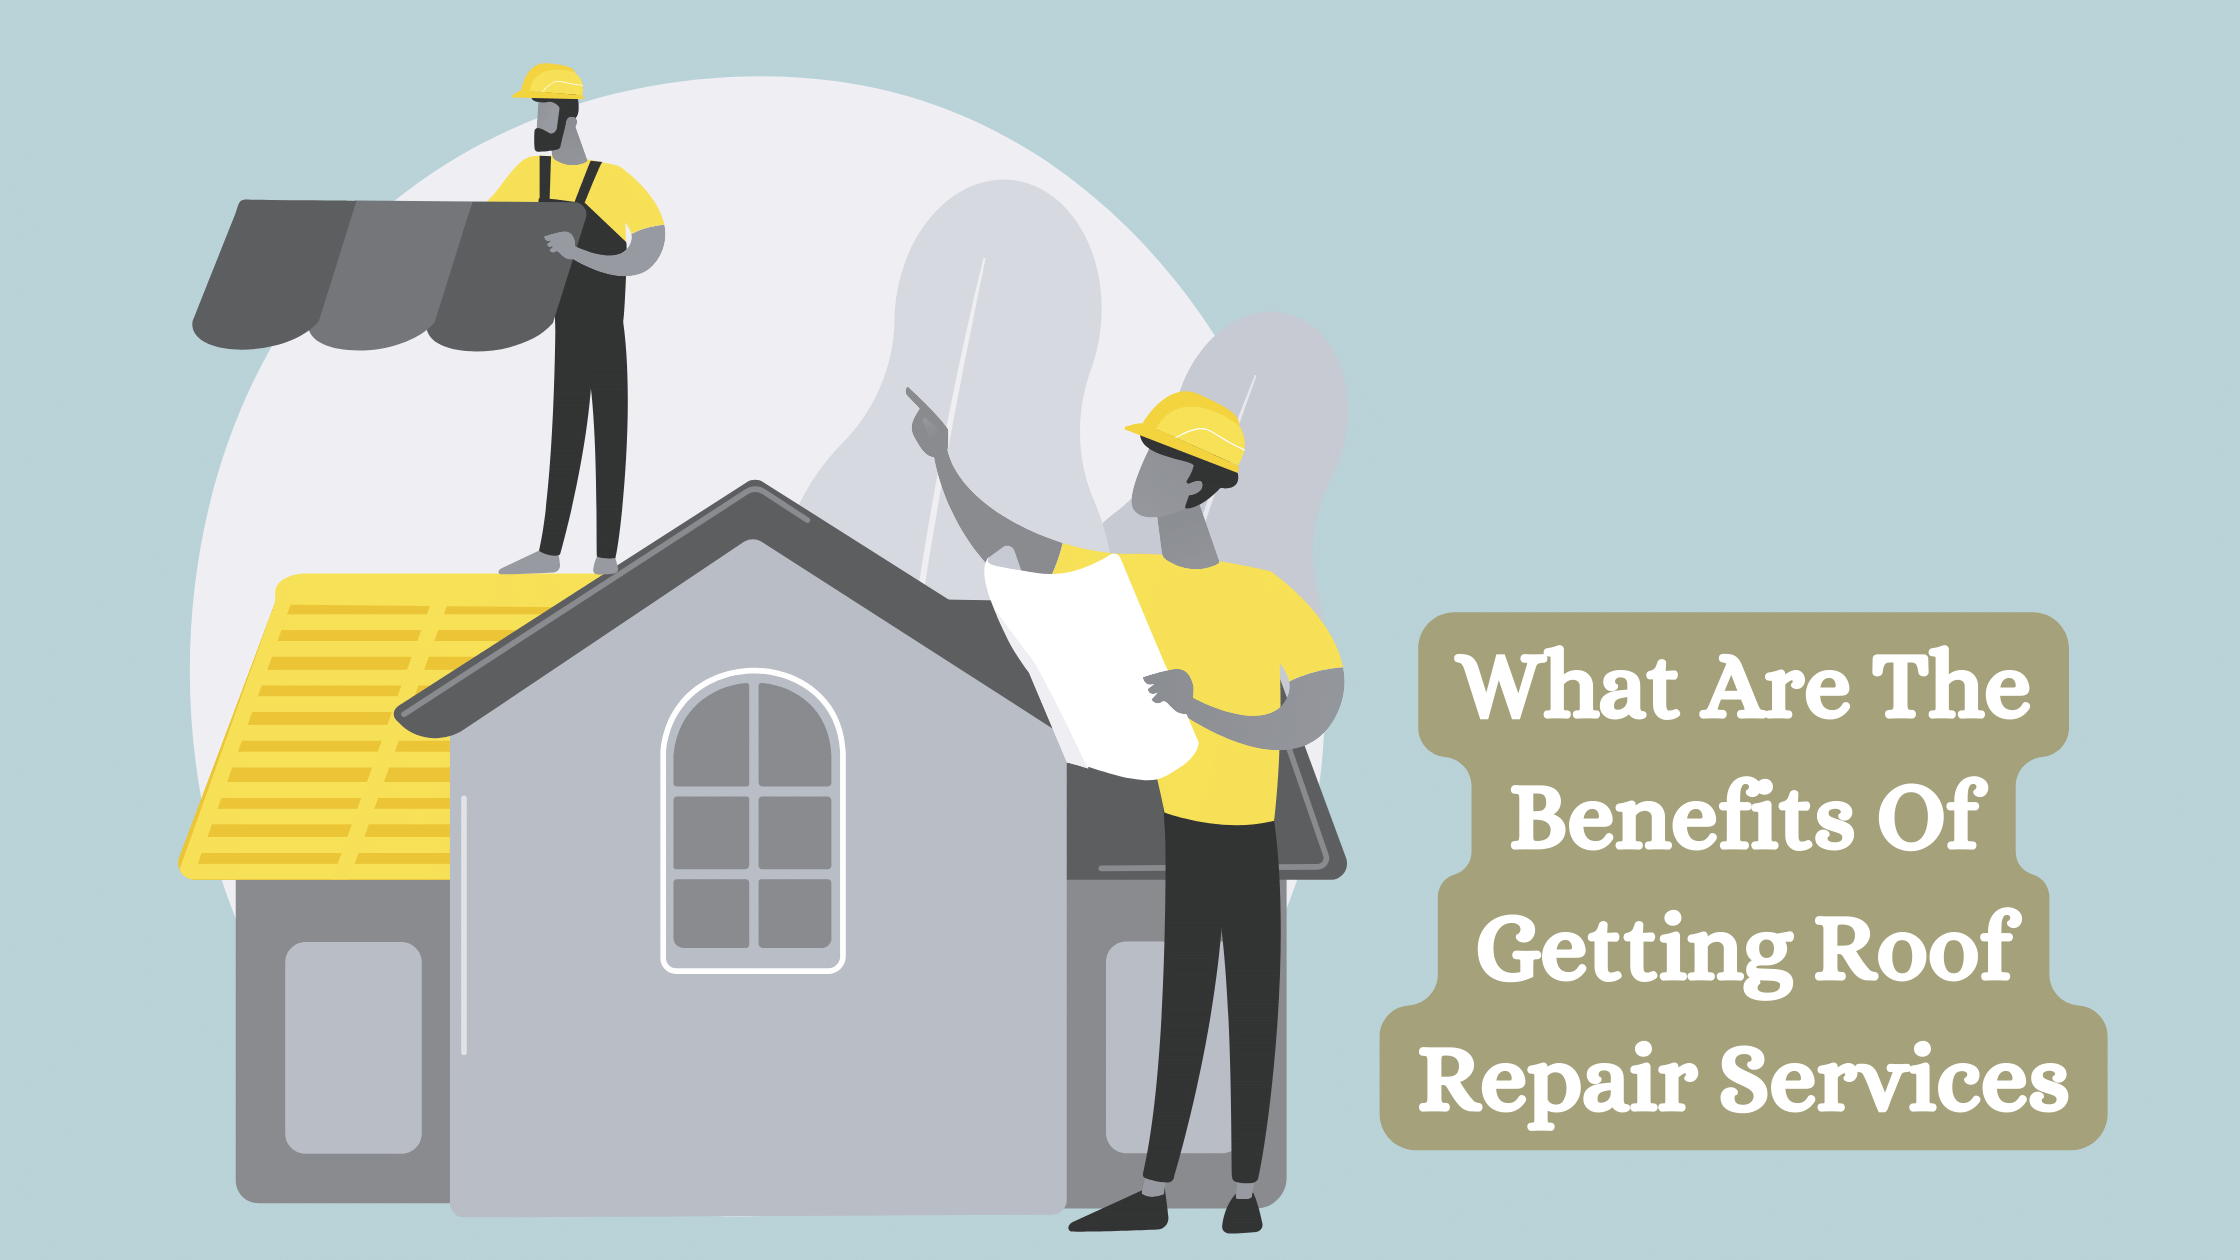 Benefits Of Getting Roof Repair Services